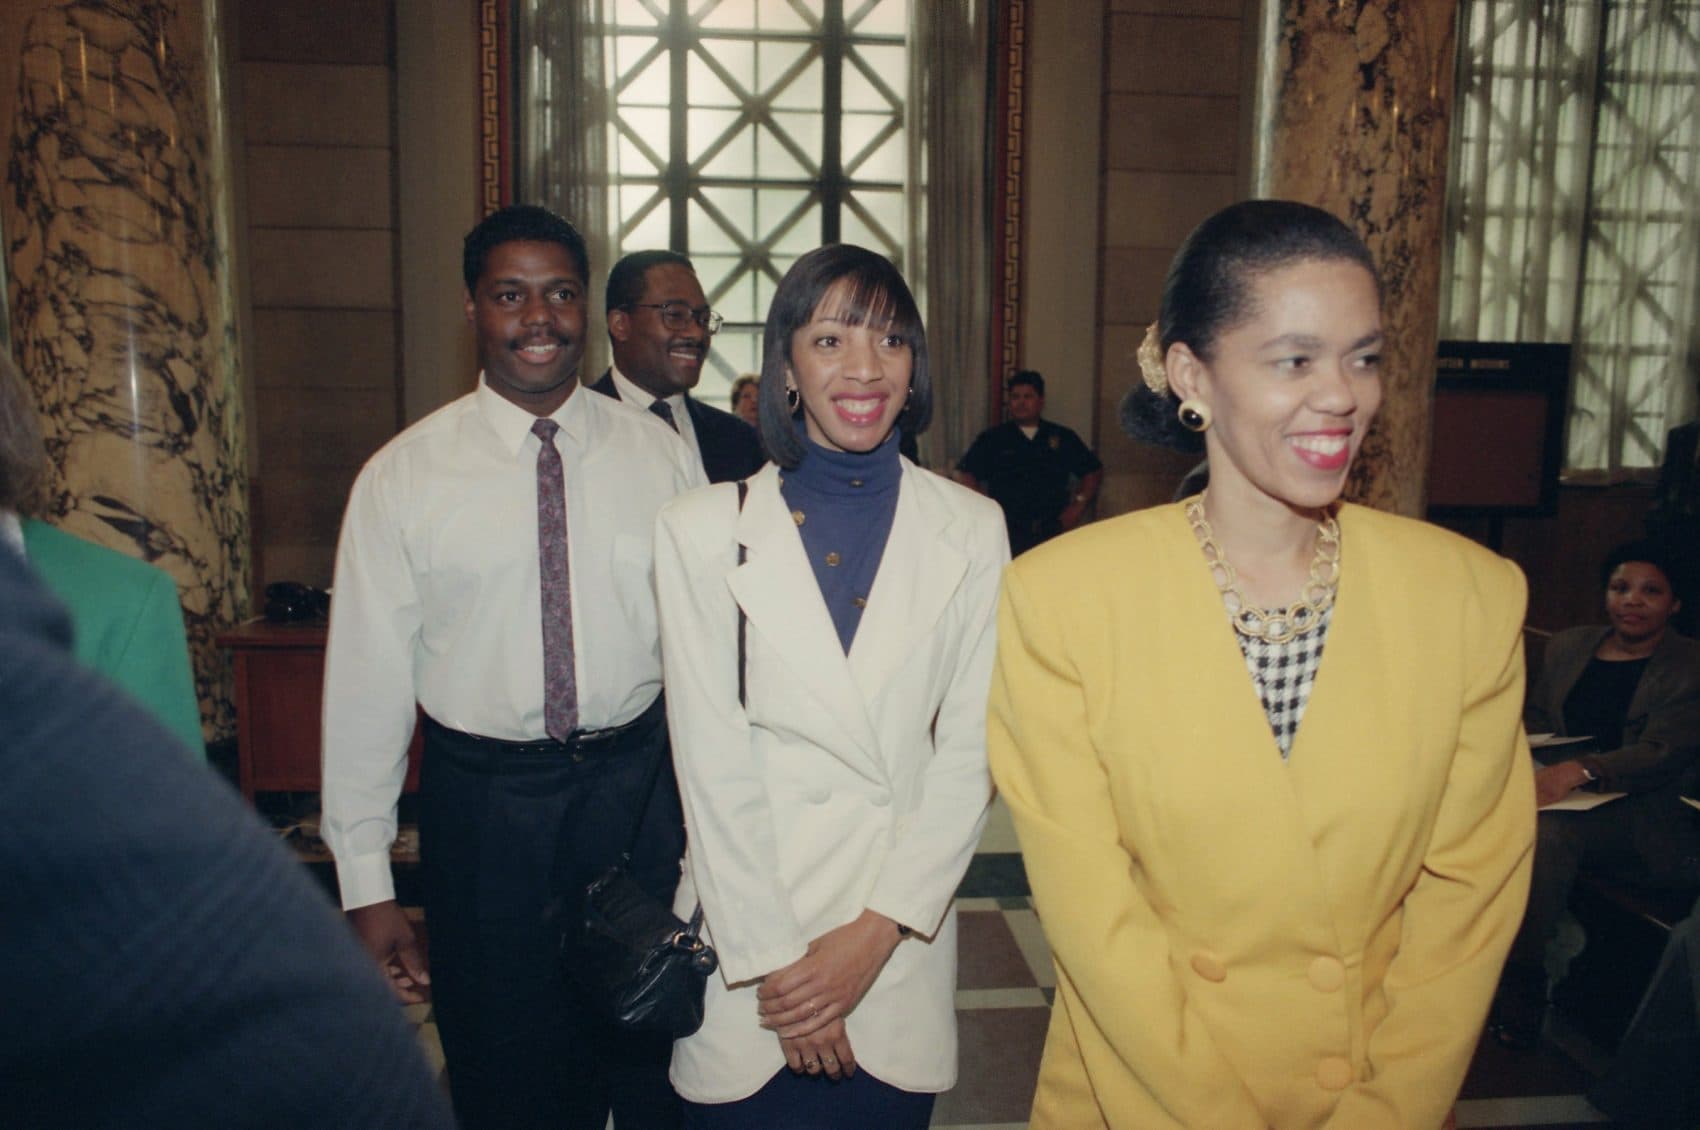 Four Los Angeles residents who rescued truck driver Reginald Denny from his rig after he was beaten during the first night of rioting were awarded a heroes' welcome at Los Angeles City Council, May 5, 1992. From right to back are Lei Yuille, Terri Barnett, Titus Murphy and Gregory Alan Williams. (Bob Galbraith/AP)